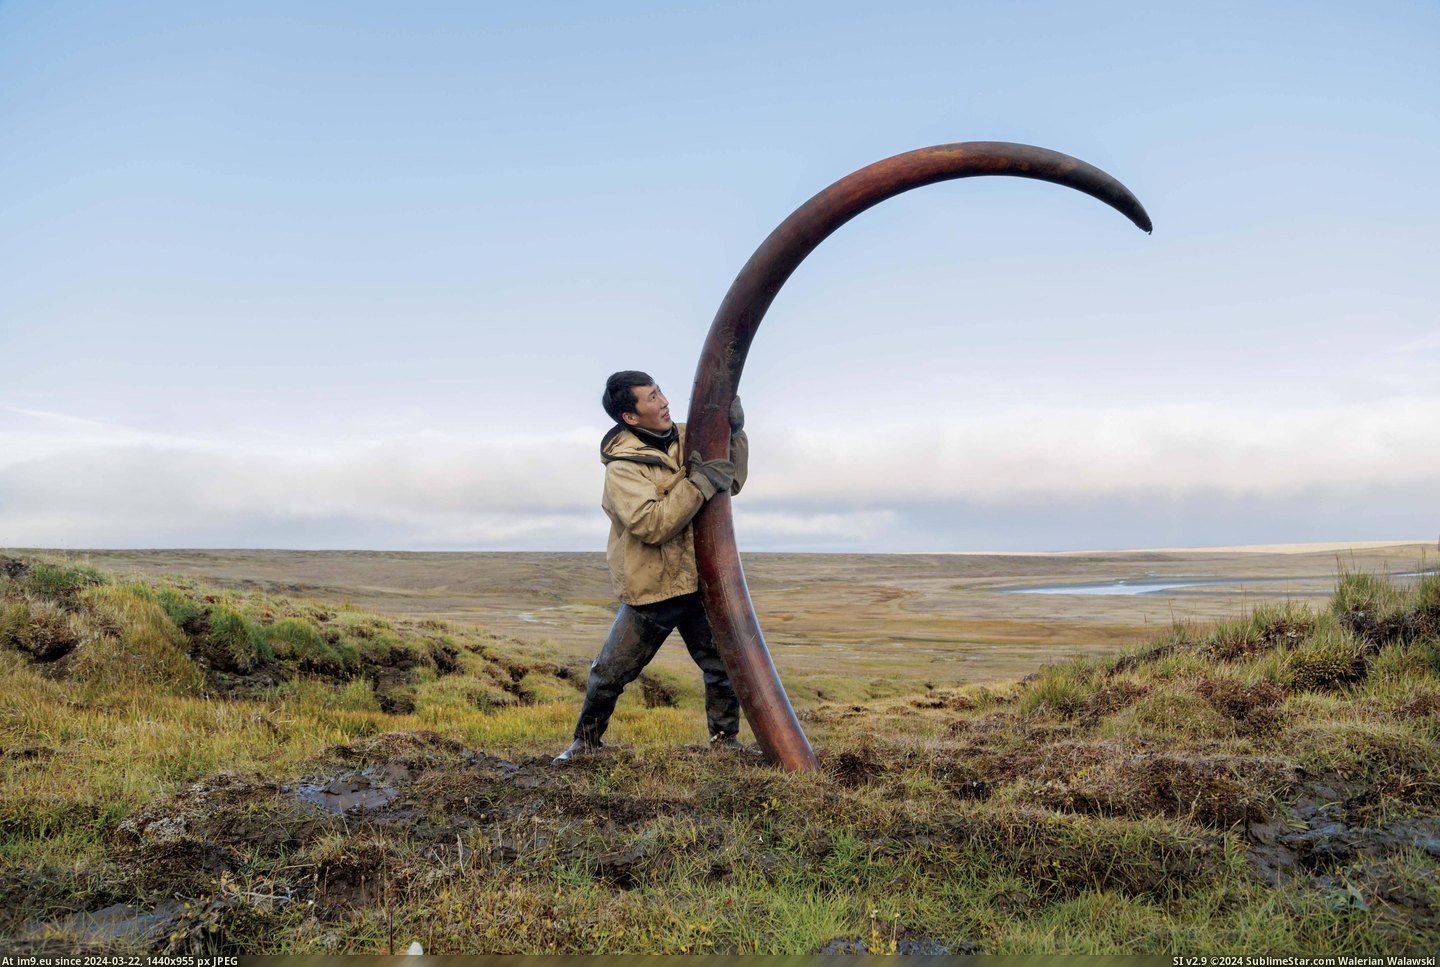 #Tusk #Siberian #Mammoth [Pics] A woolly mammoth's tusk is unearthed from a Siberian riverbed Pic. (Obraz z album My r/PICS favs))